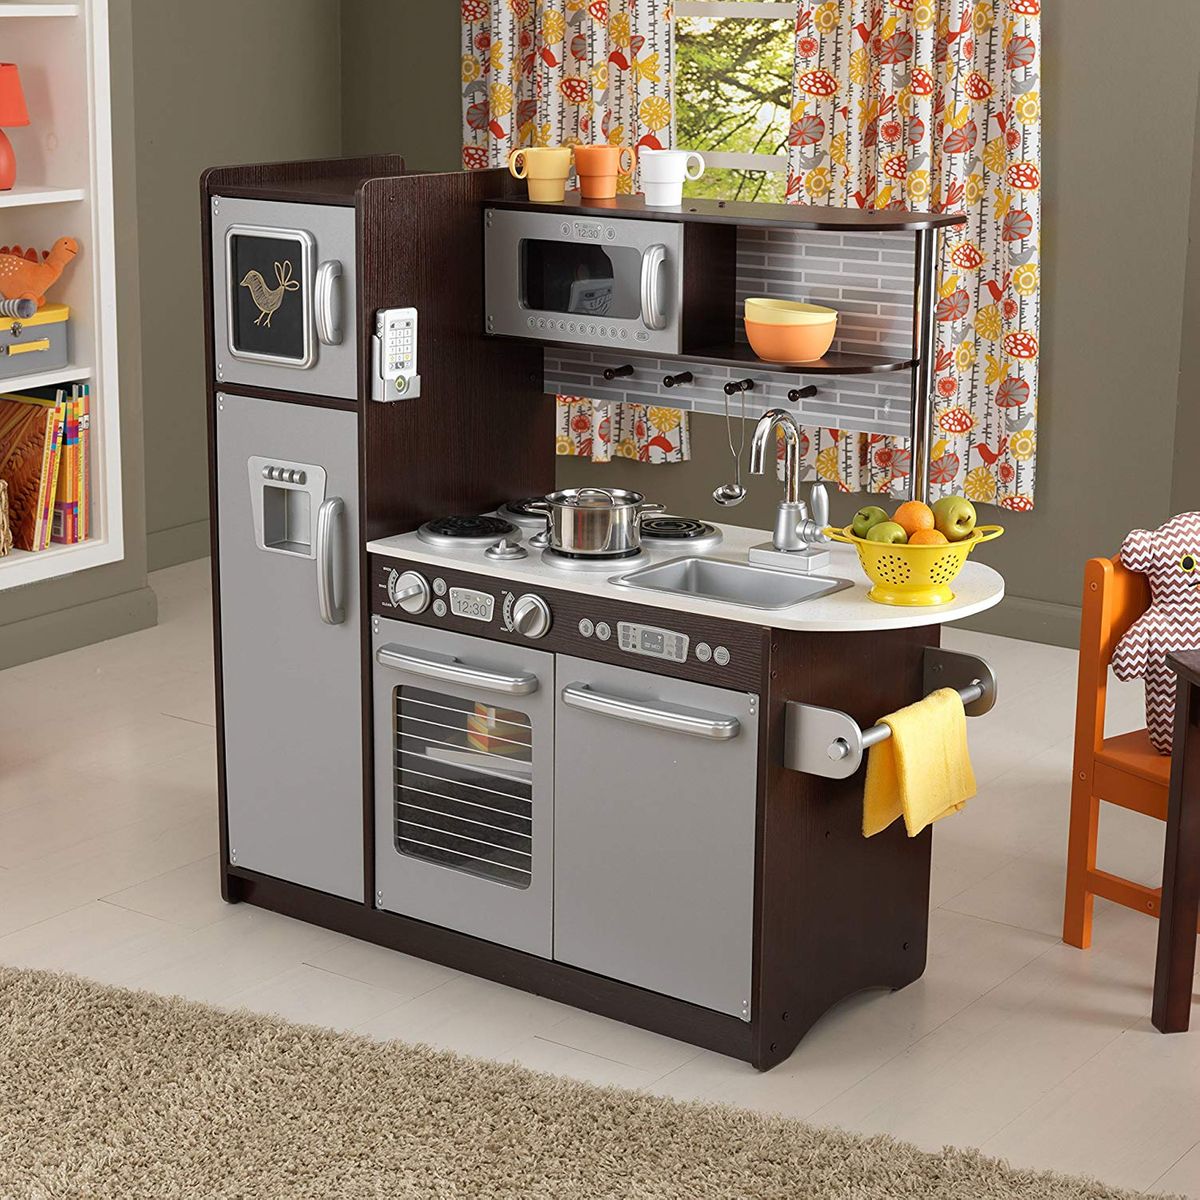 step2 deluxe kitchen lowest price